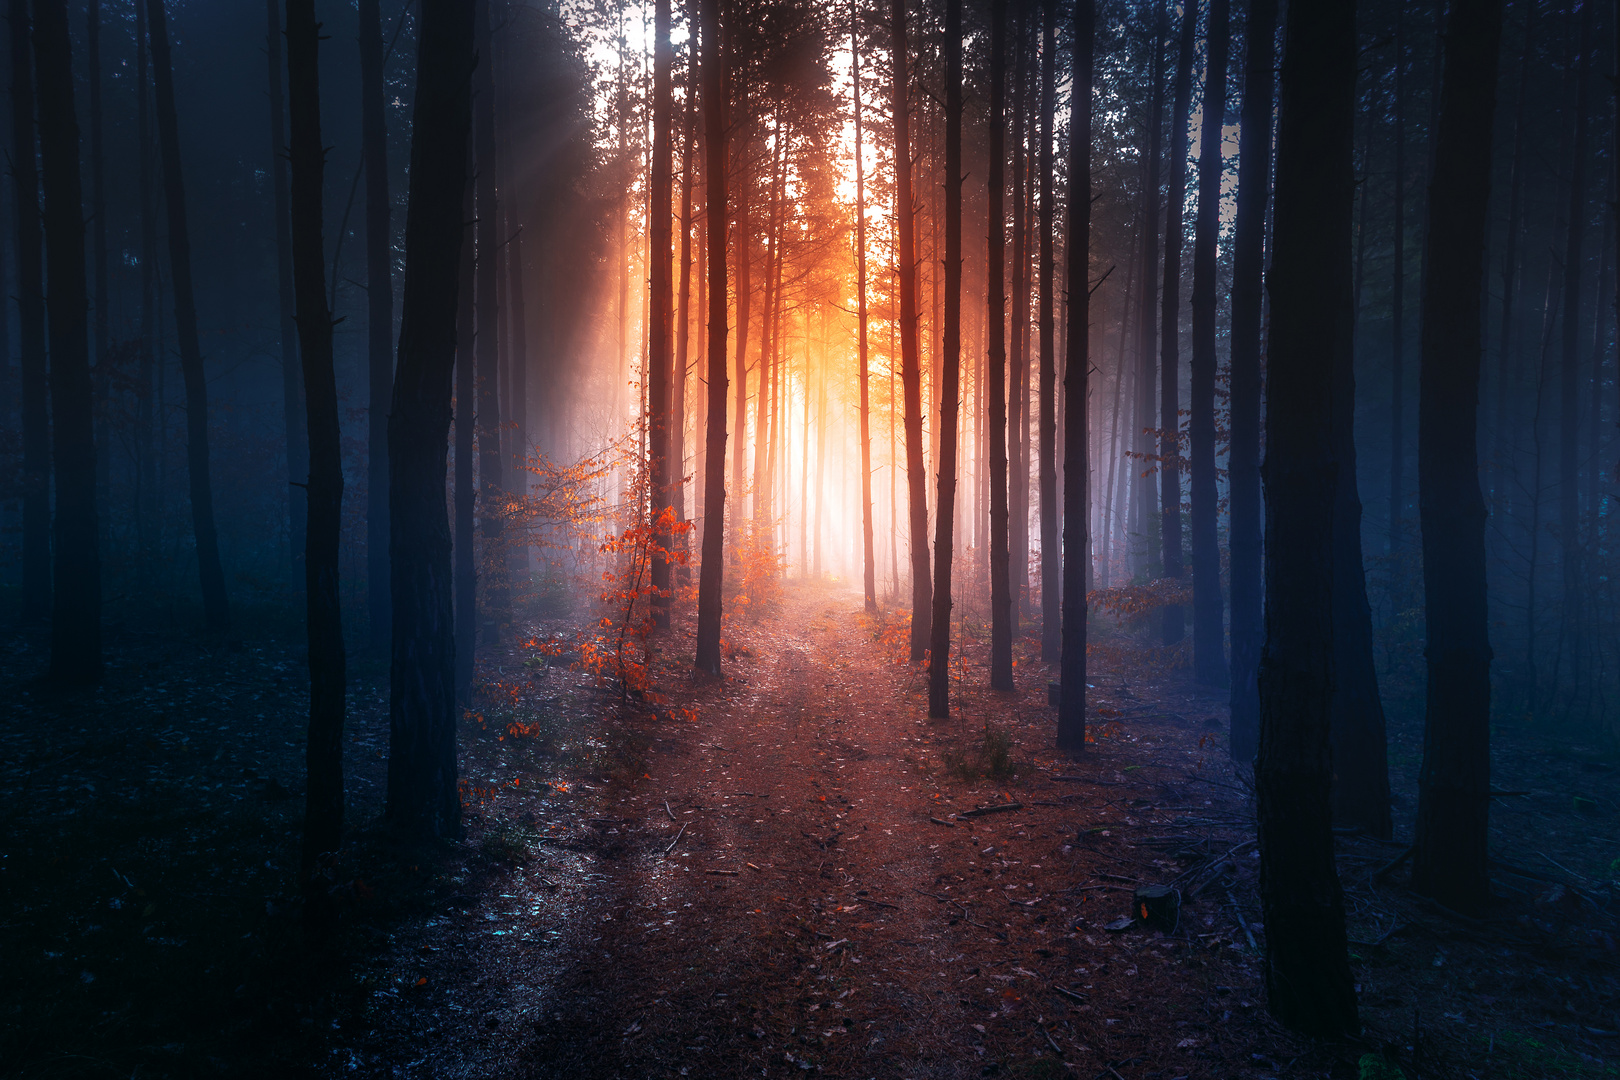 Magic Forest photo & image | landscape, forest, nature images at photo